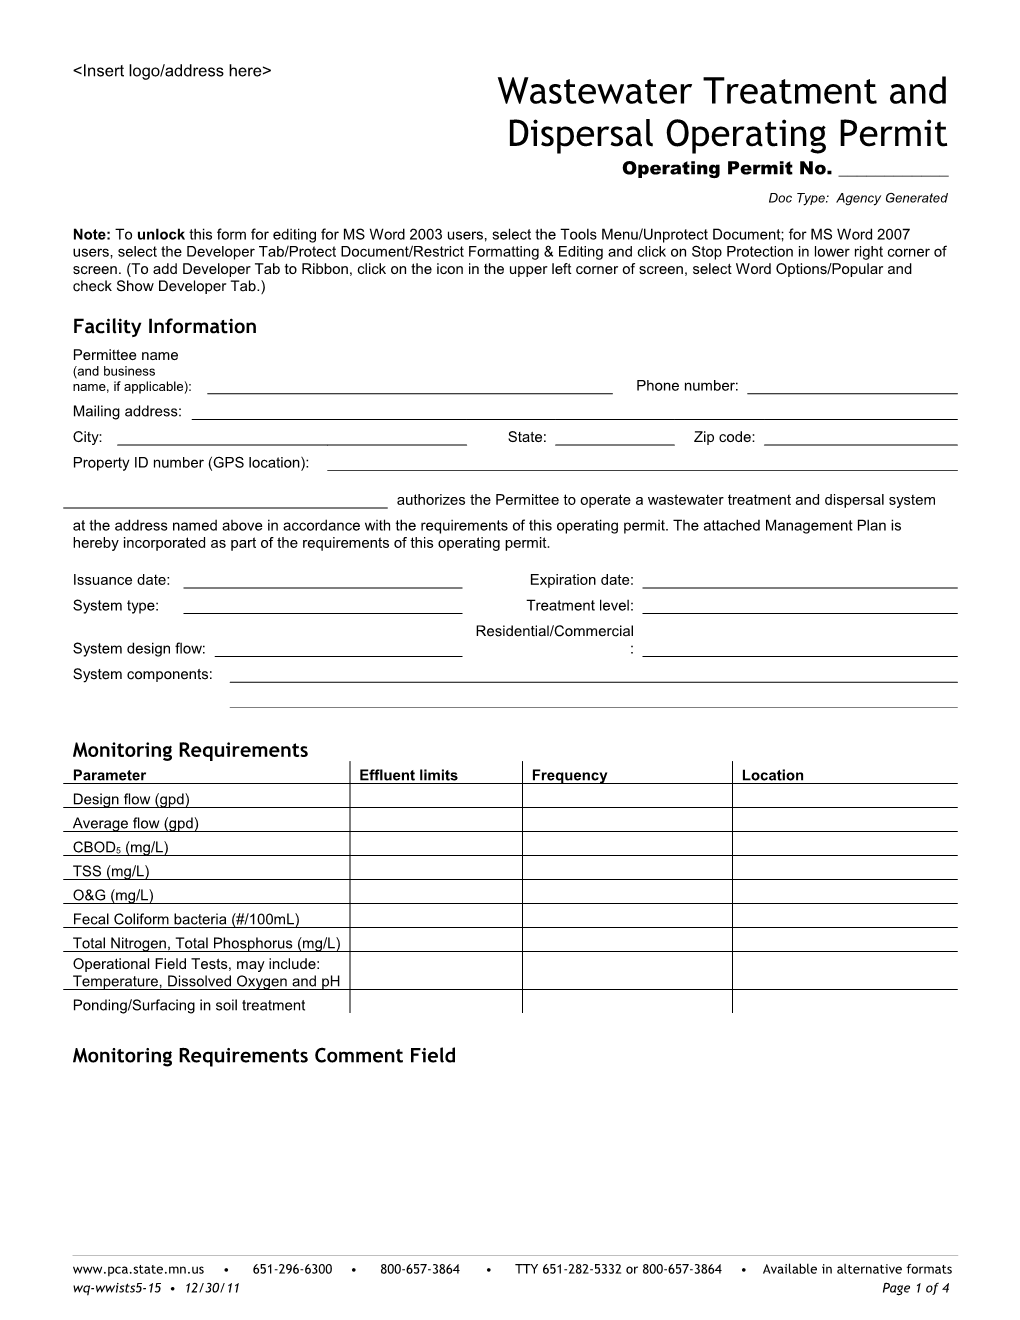 Wastewater Treatment and Dispersal Operating Permit Template